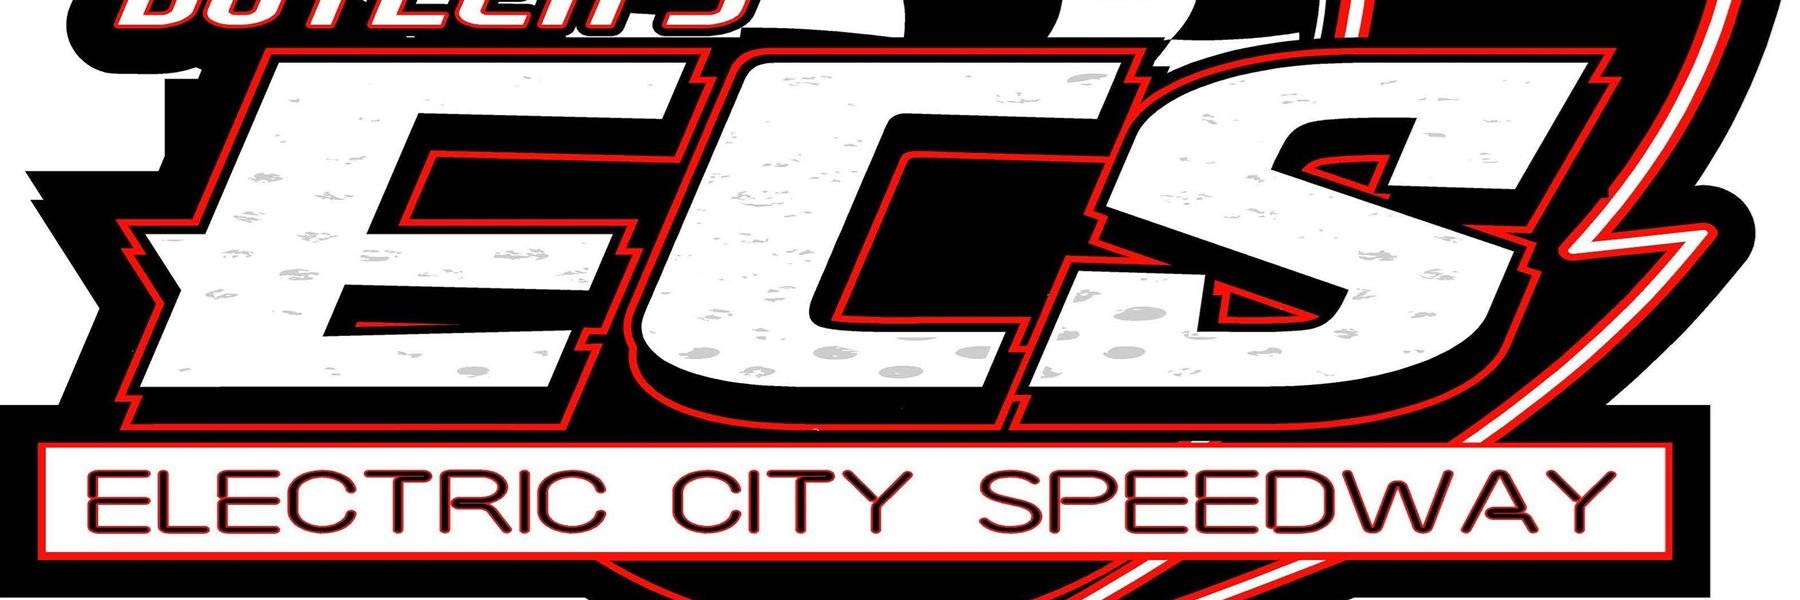 7/29/2022 - Electric City Speedway